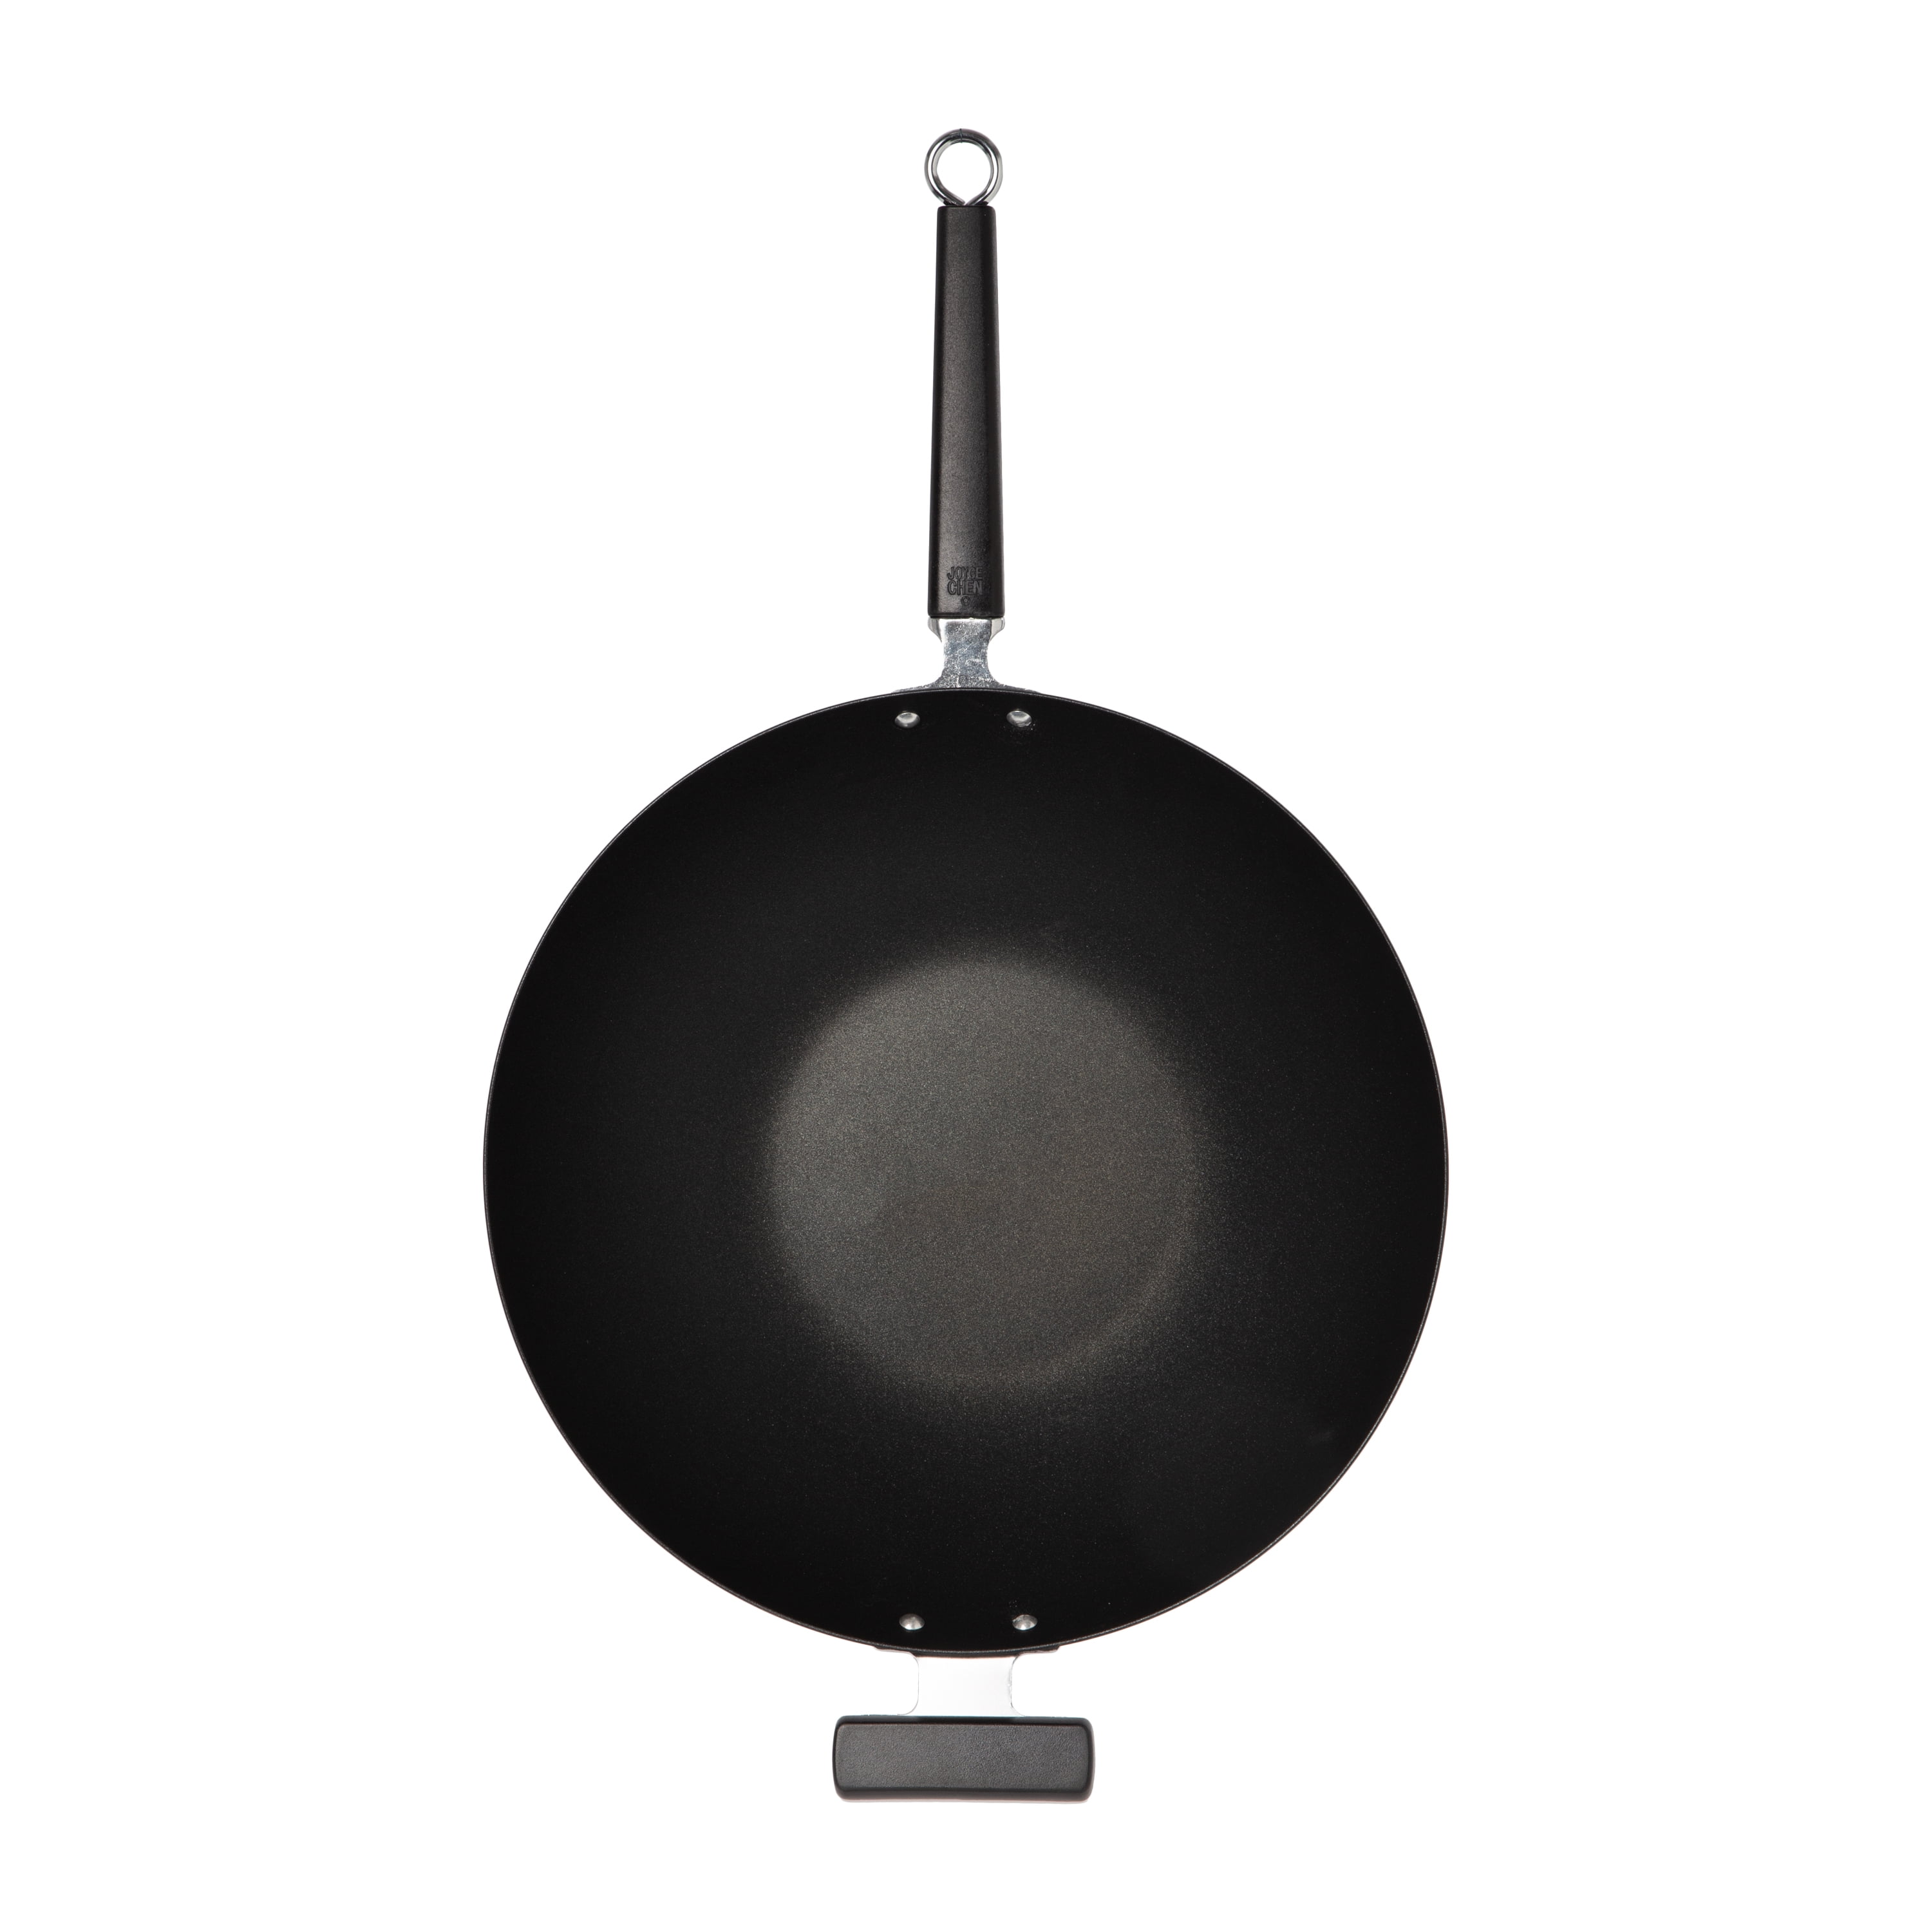 DiamoTech 12 Eazy Flip Wok, Ceramic Nonstick, Toxin-Free, Stainless Steel Knives and Recipe Book Black